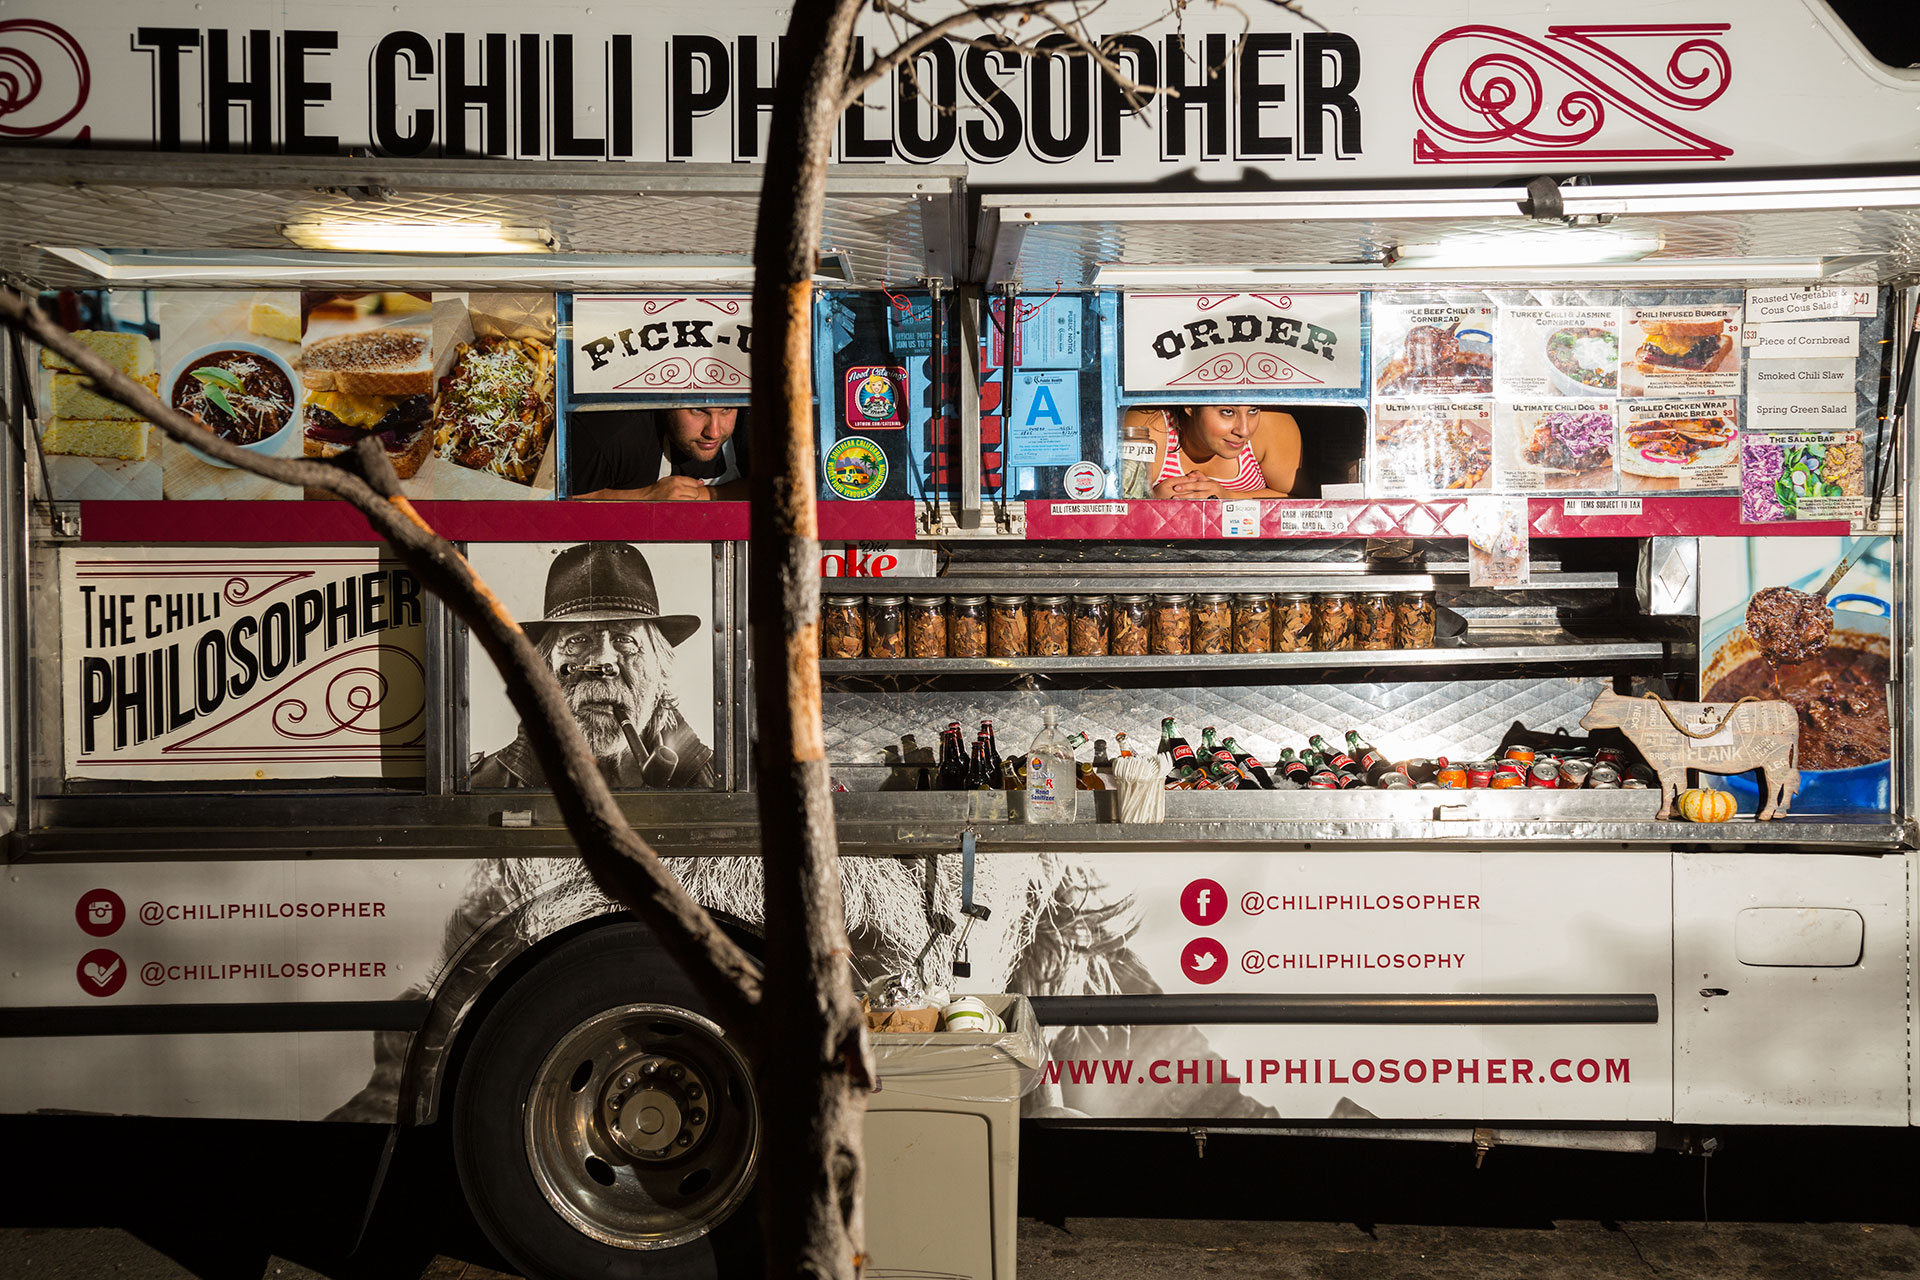  Down-home dishes meet high-end, locally sourced ingredients in the Chili Philosopher’s food. A strong brand identity and an aggressive social media strategy are essential to differentiate trucks in an increasingly crowded marketplace.  Los Angeles, 